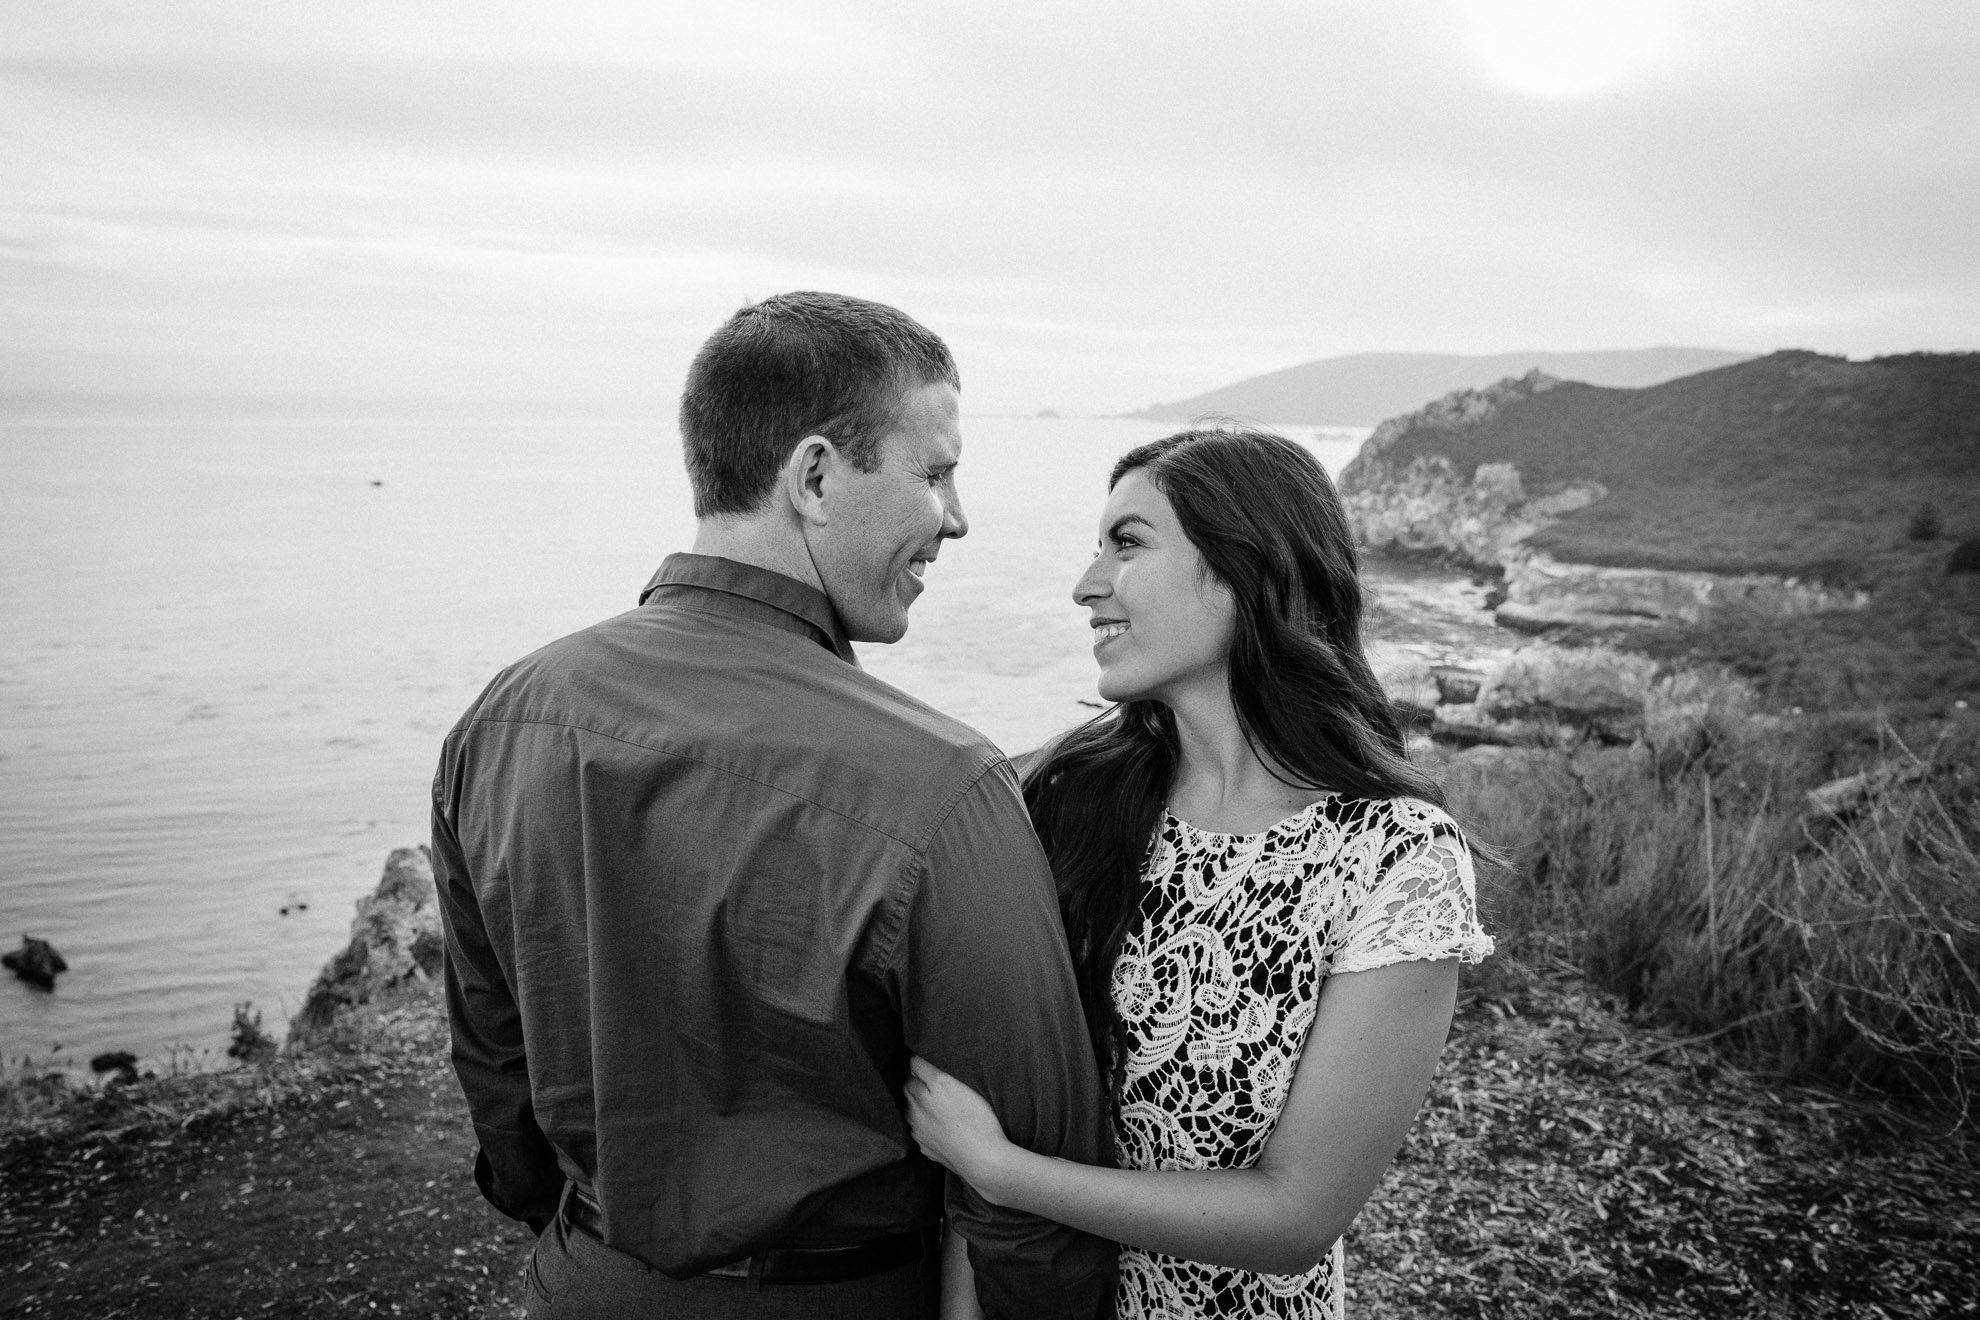 Lyzette and Owen's Engagement Photos by Michael Stephens Photography